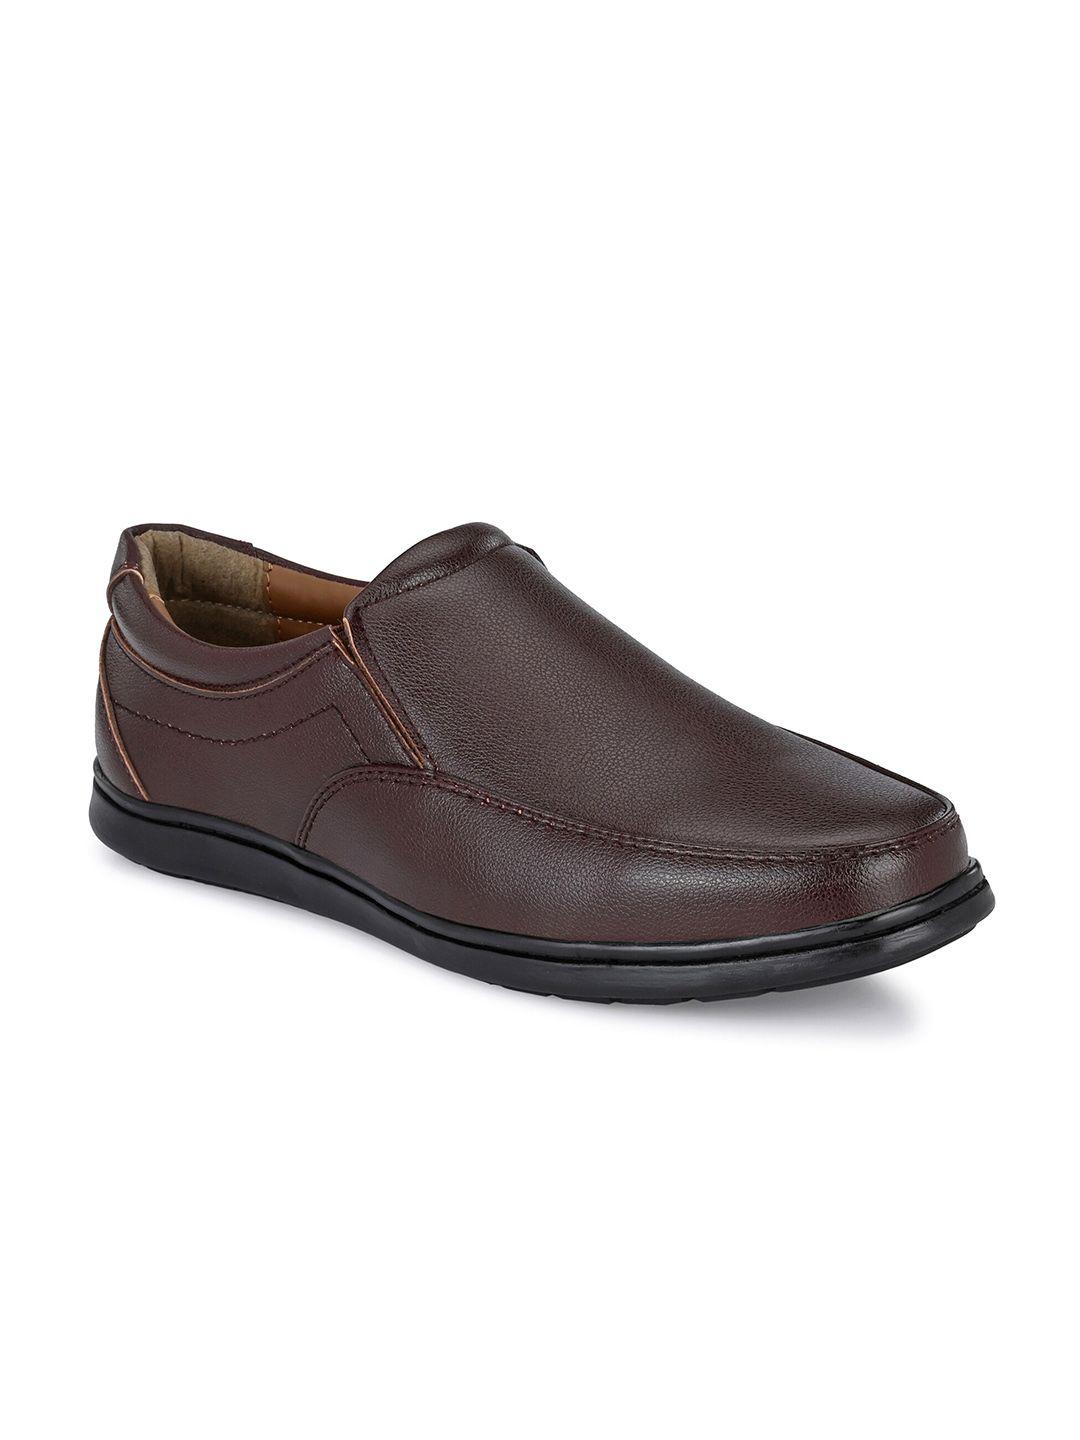 eego italy men brown solid formal shoes